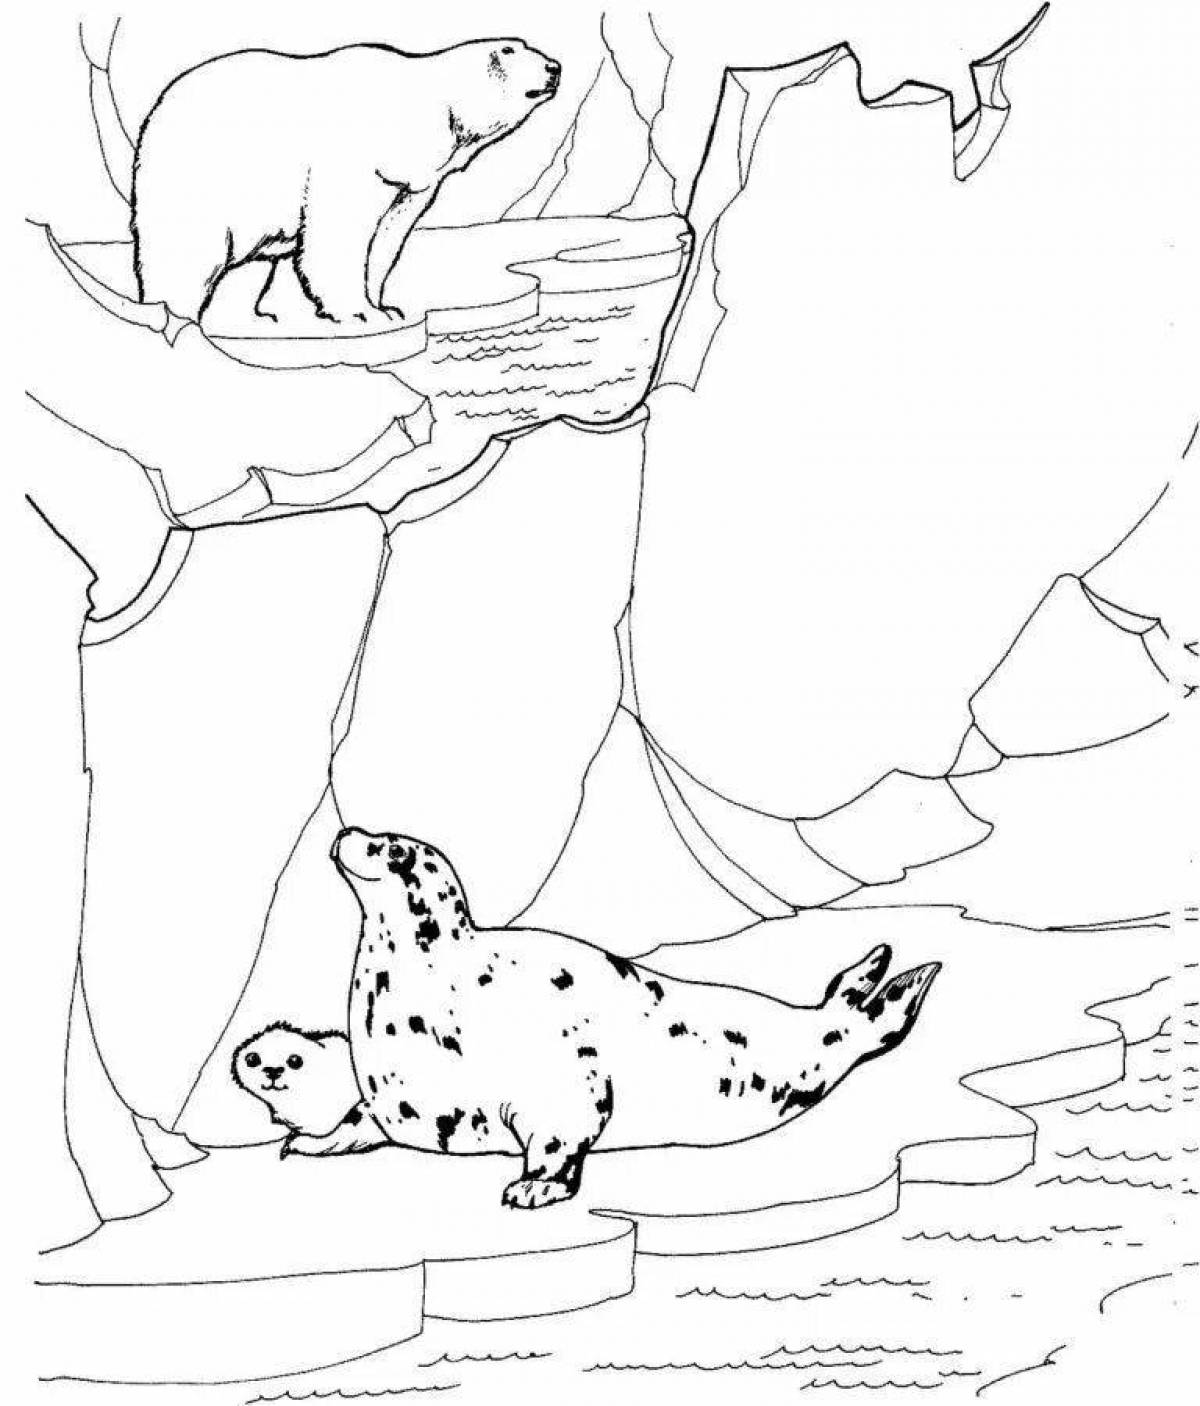 Adorable northern animals coloring page